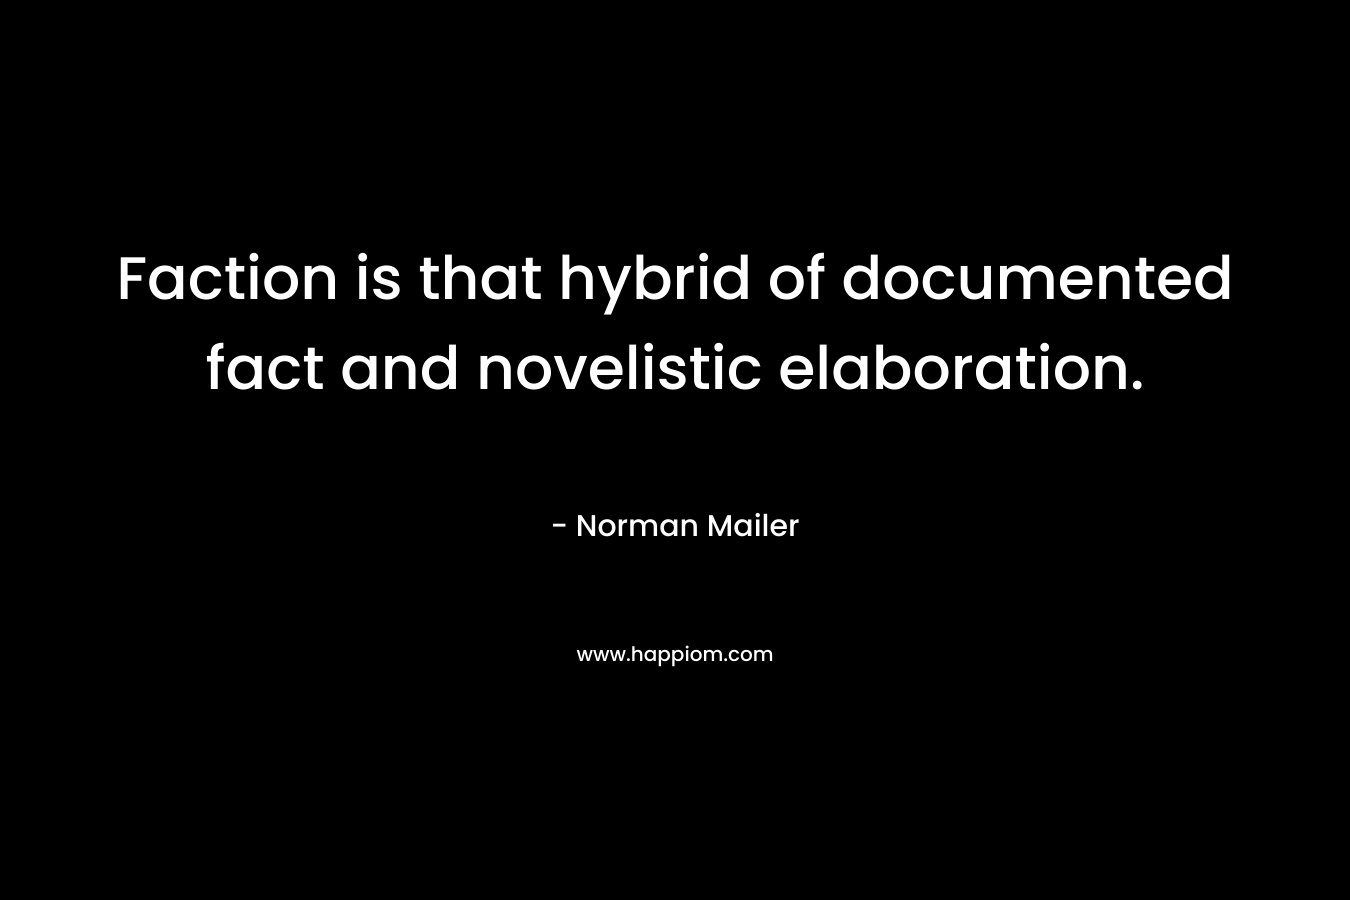 Faction is that hybrid of documented fact and novelistic elaboration.